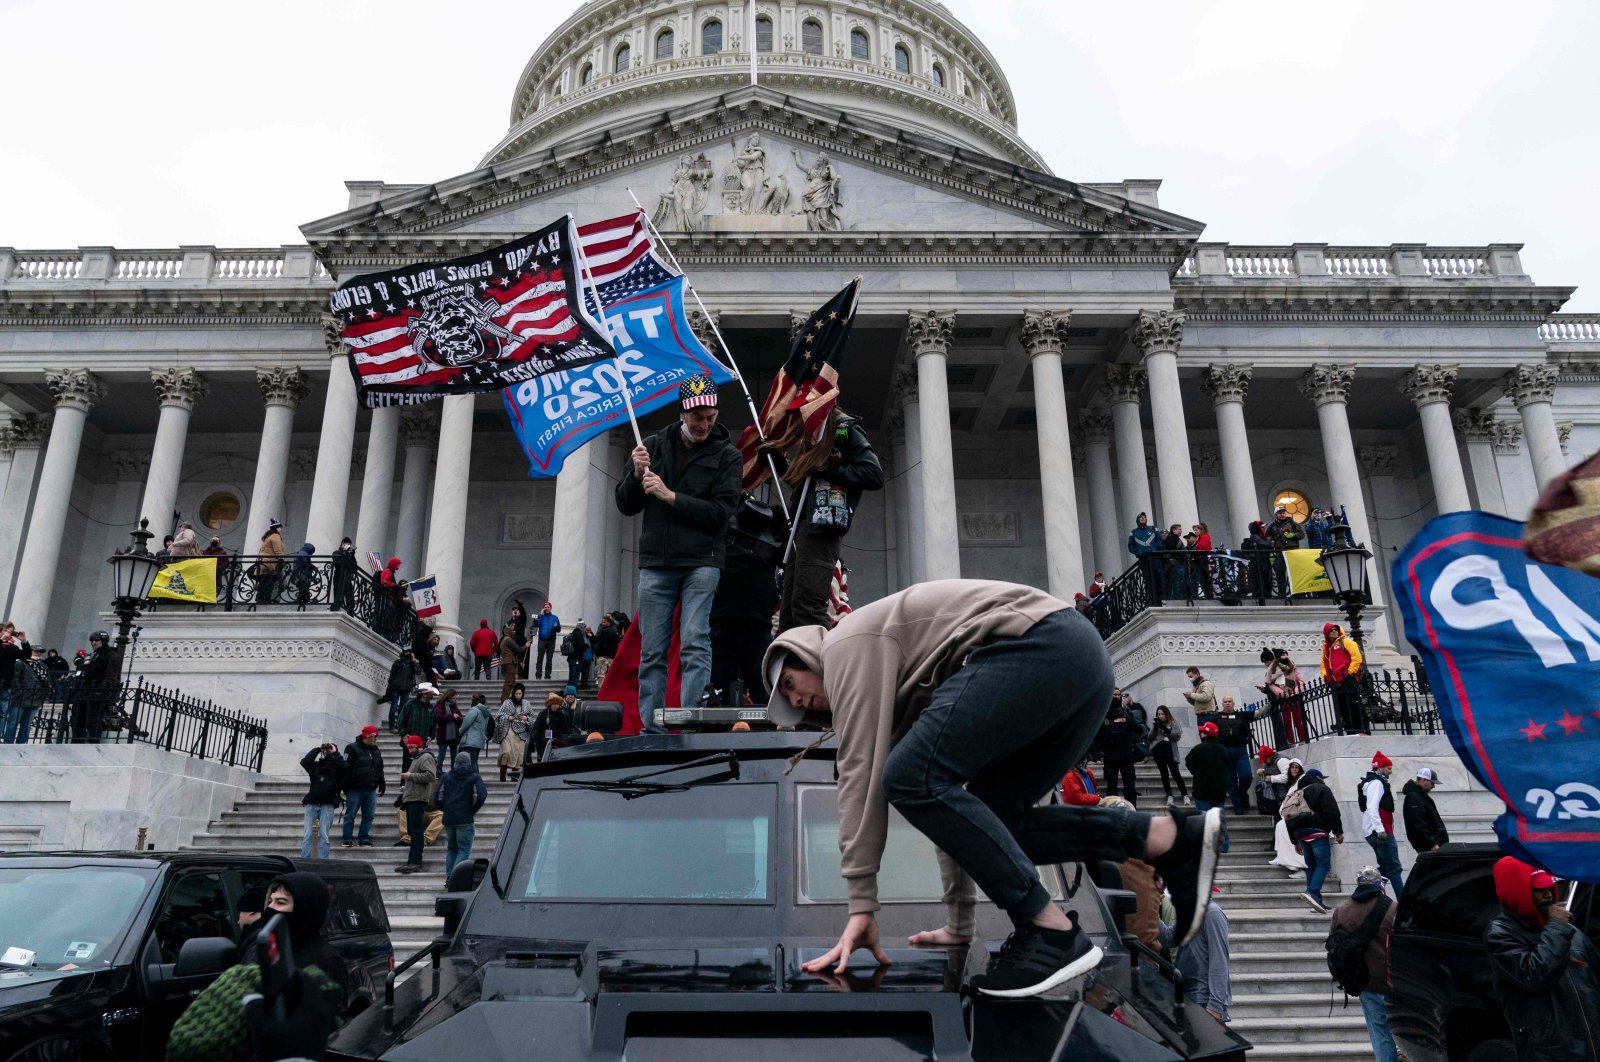 Supporters of then-U.S. President Donald Trump protest outside the Capitol, Washington, D.C., U.S., Jan. 6, 2021. (AFP Photo)